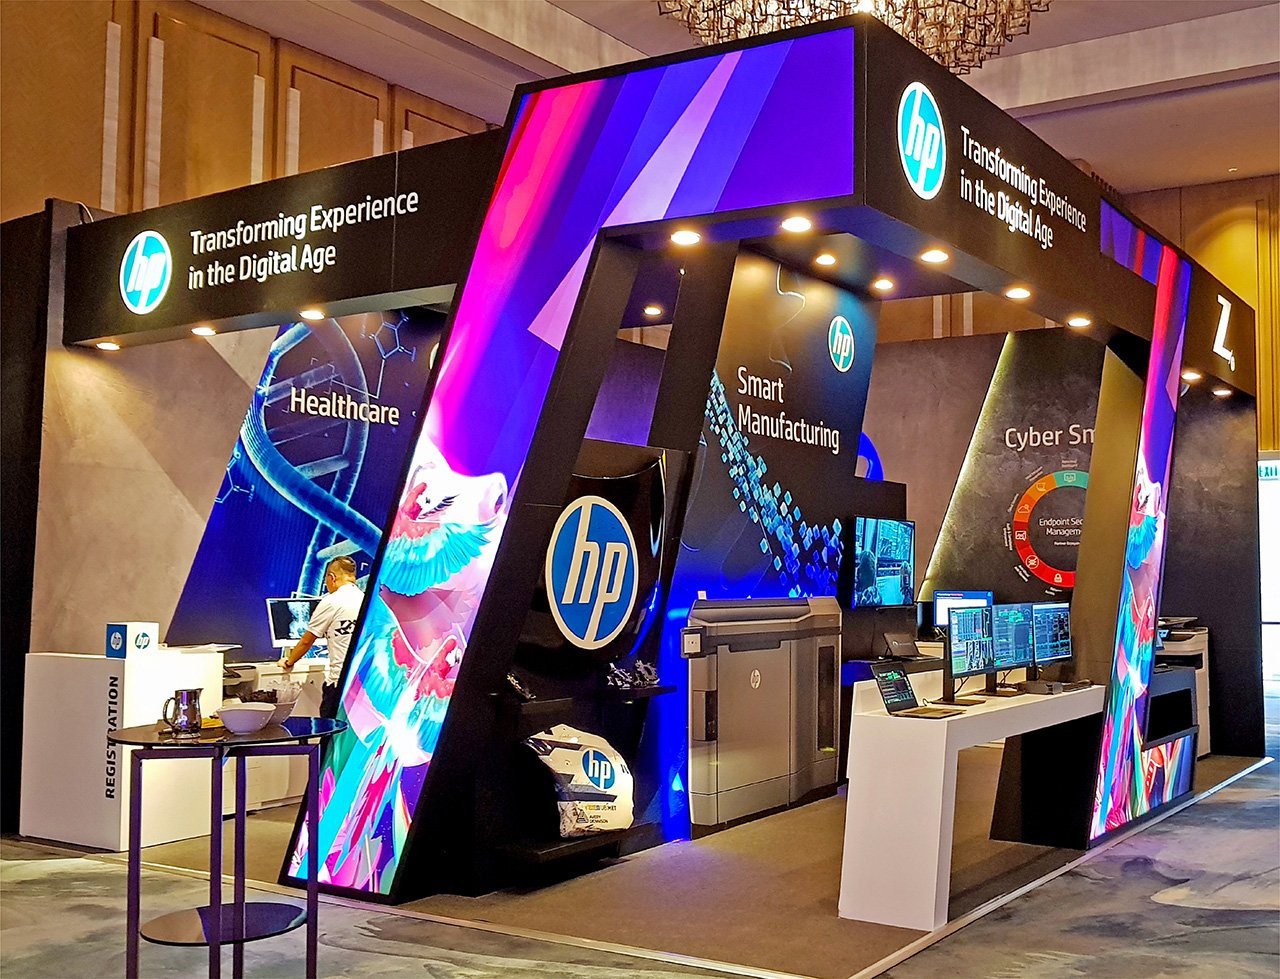 Creative design of exhibition booth to attract visitors and showcase new products and solutions